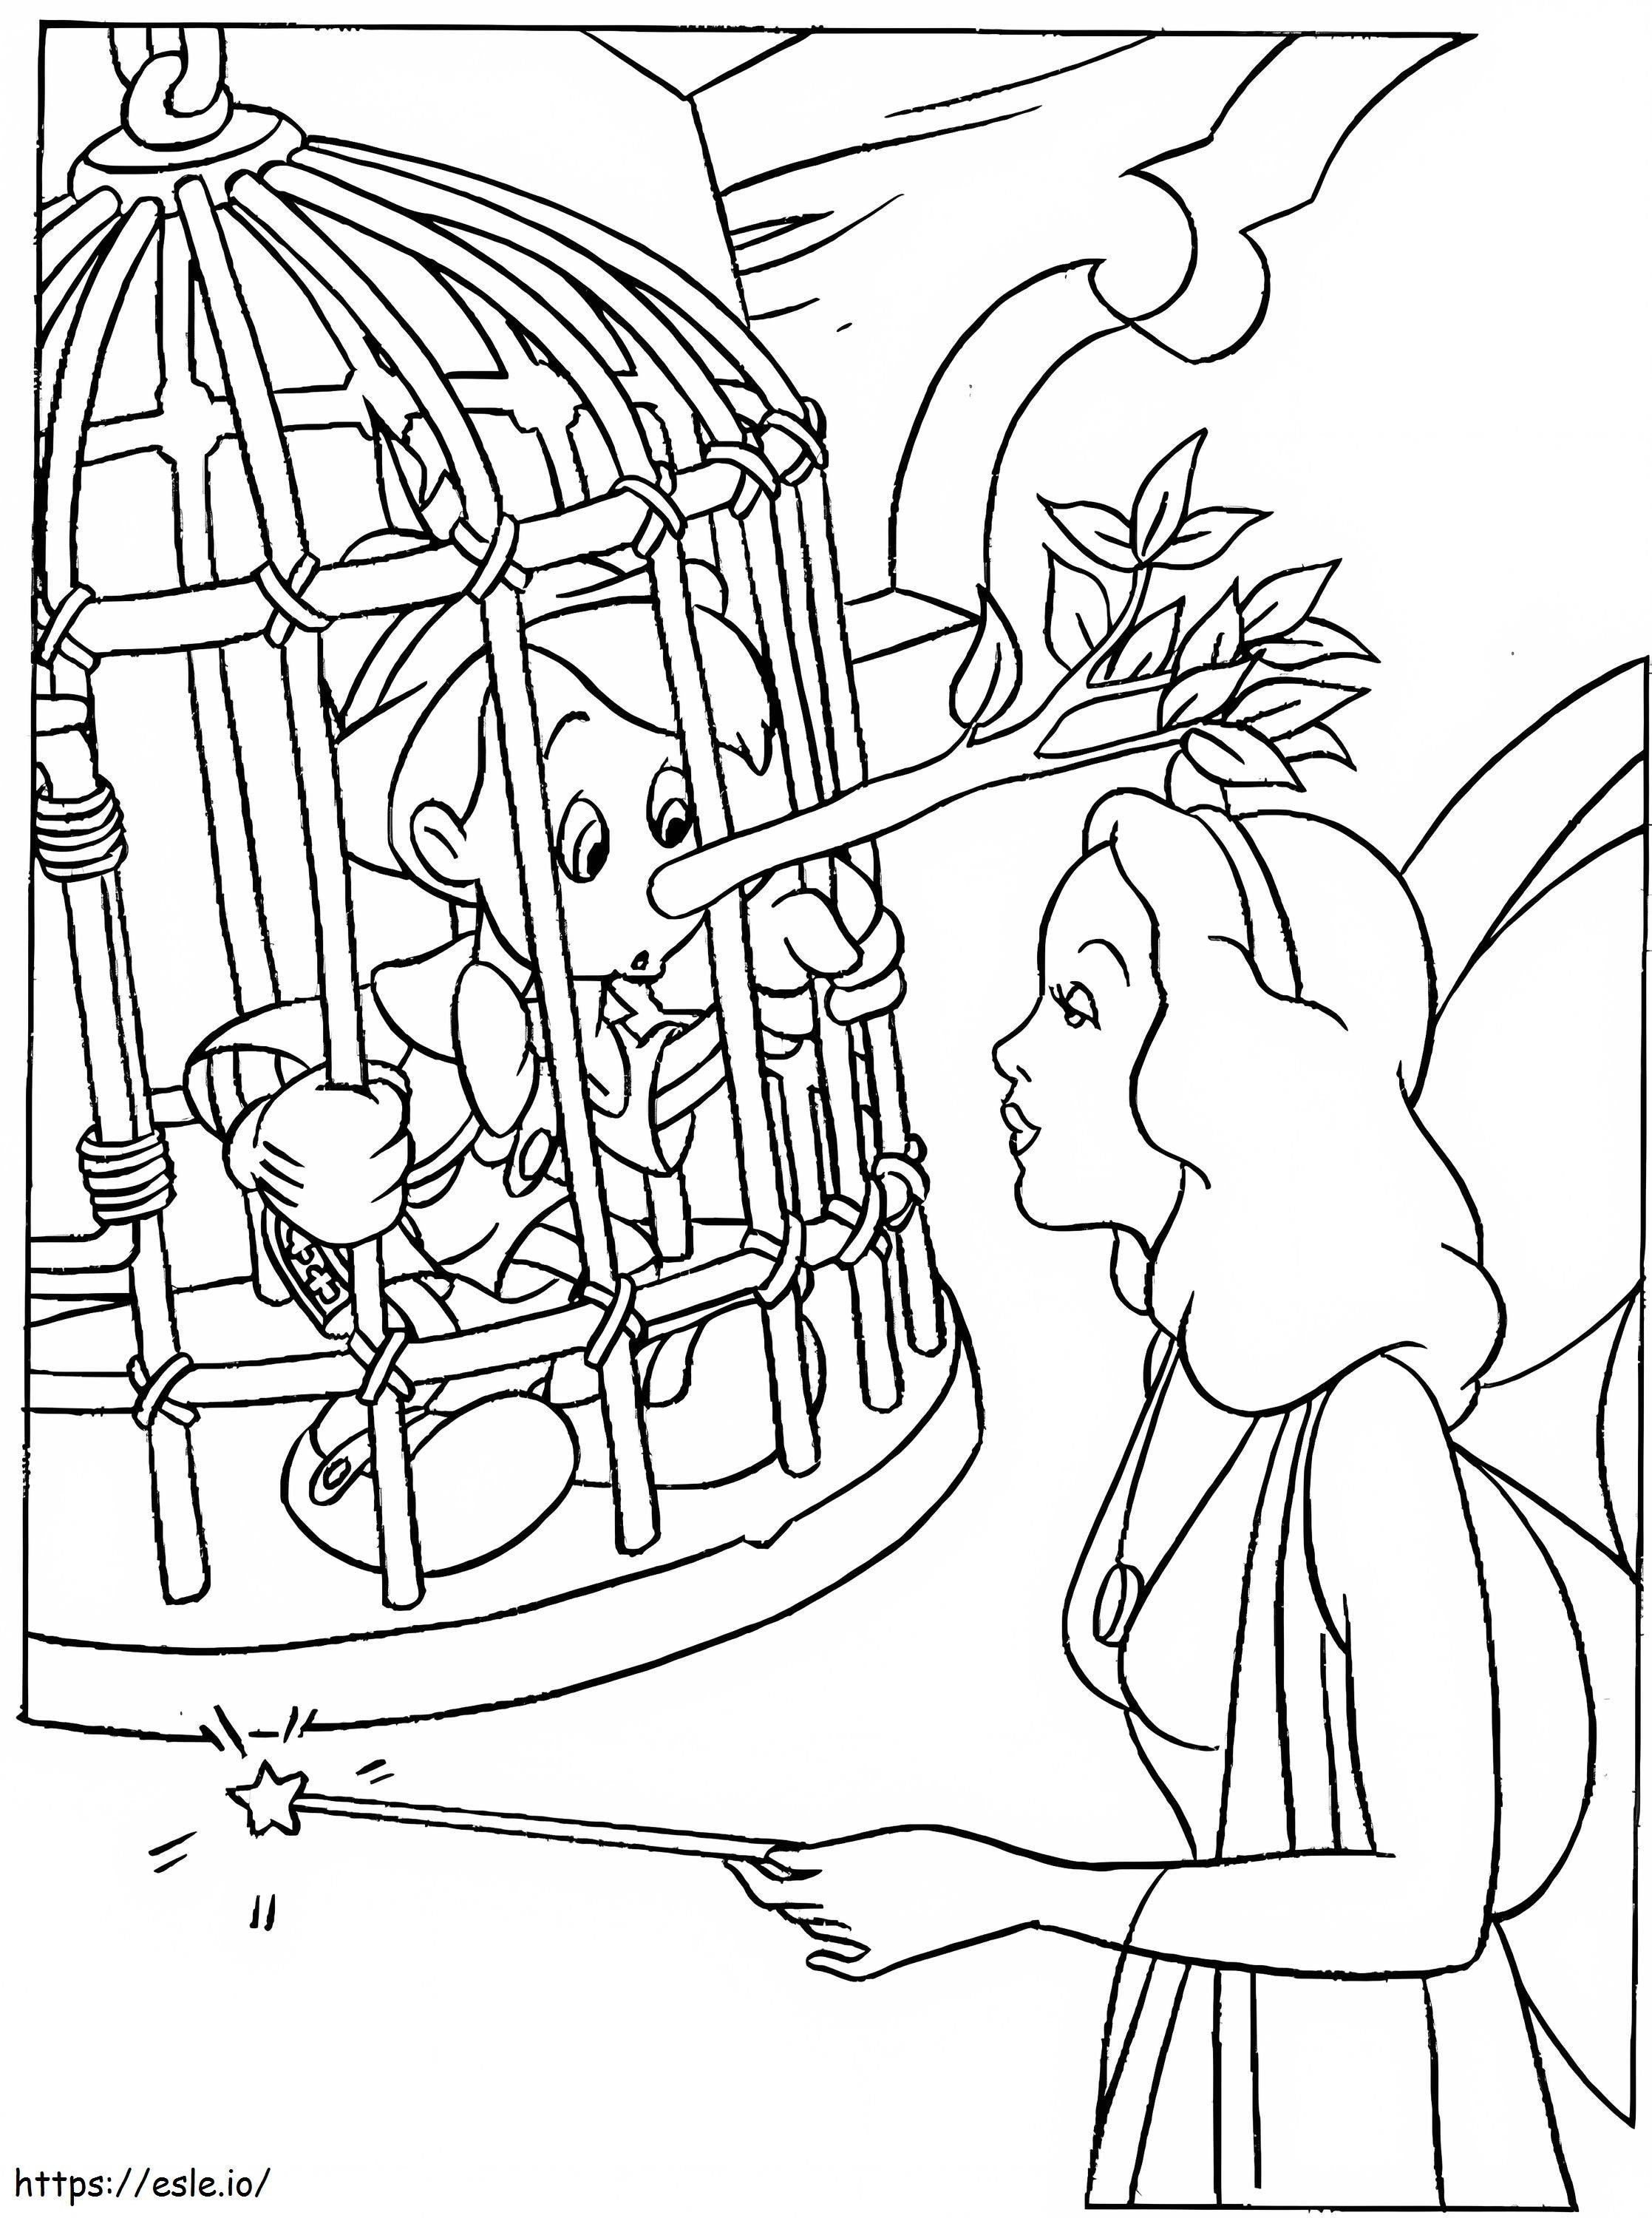 Pinocchio 3 coloring page